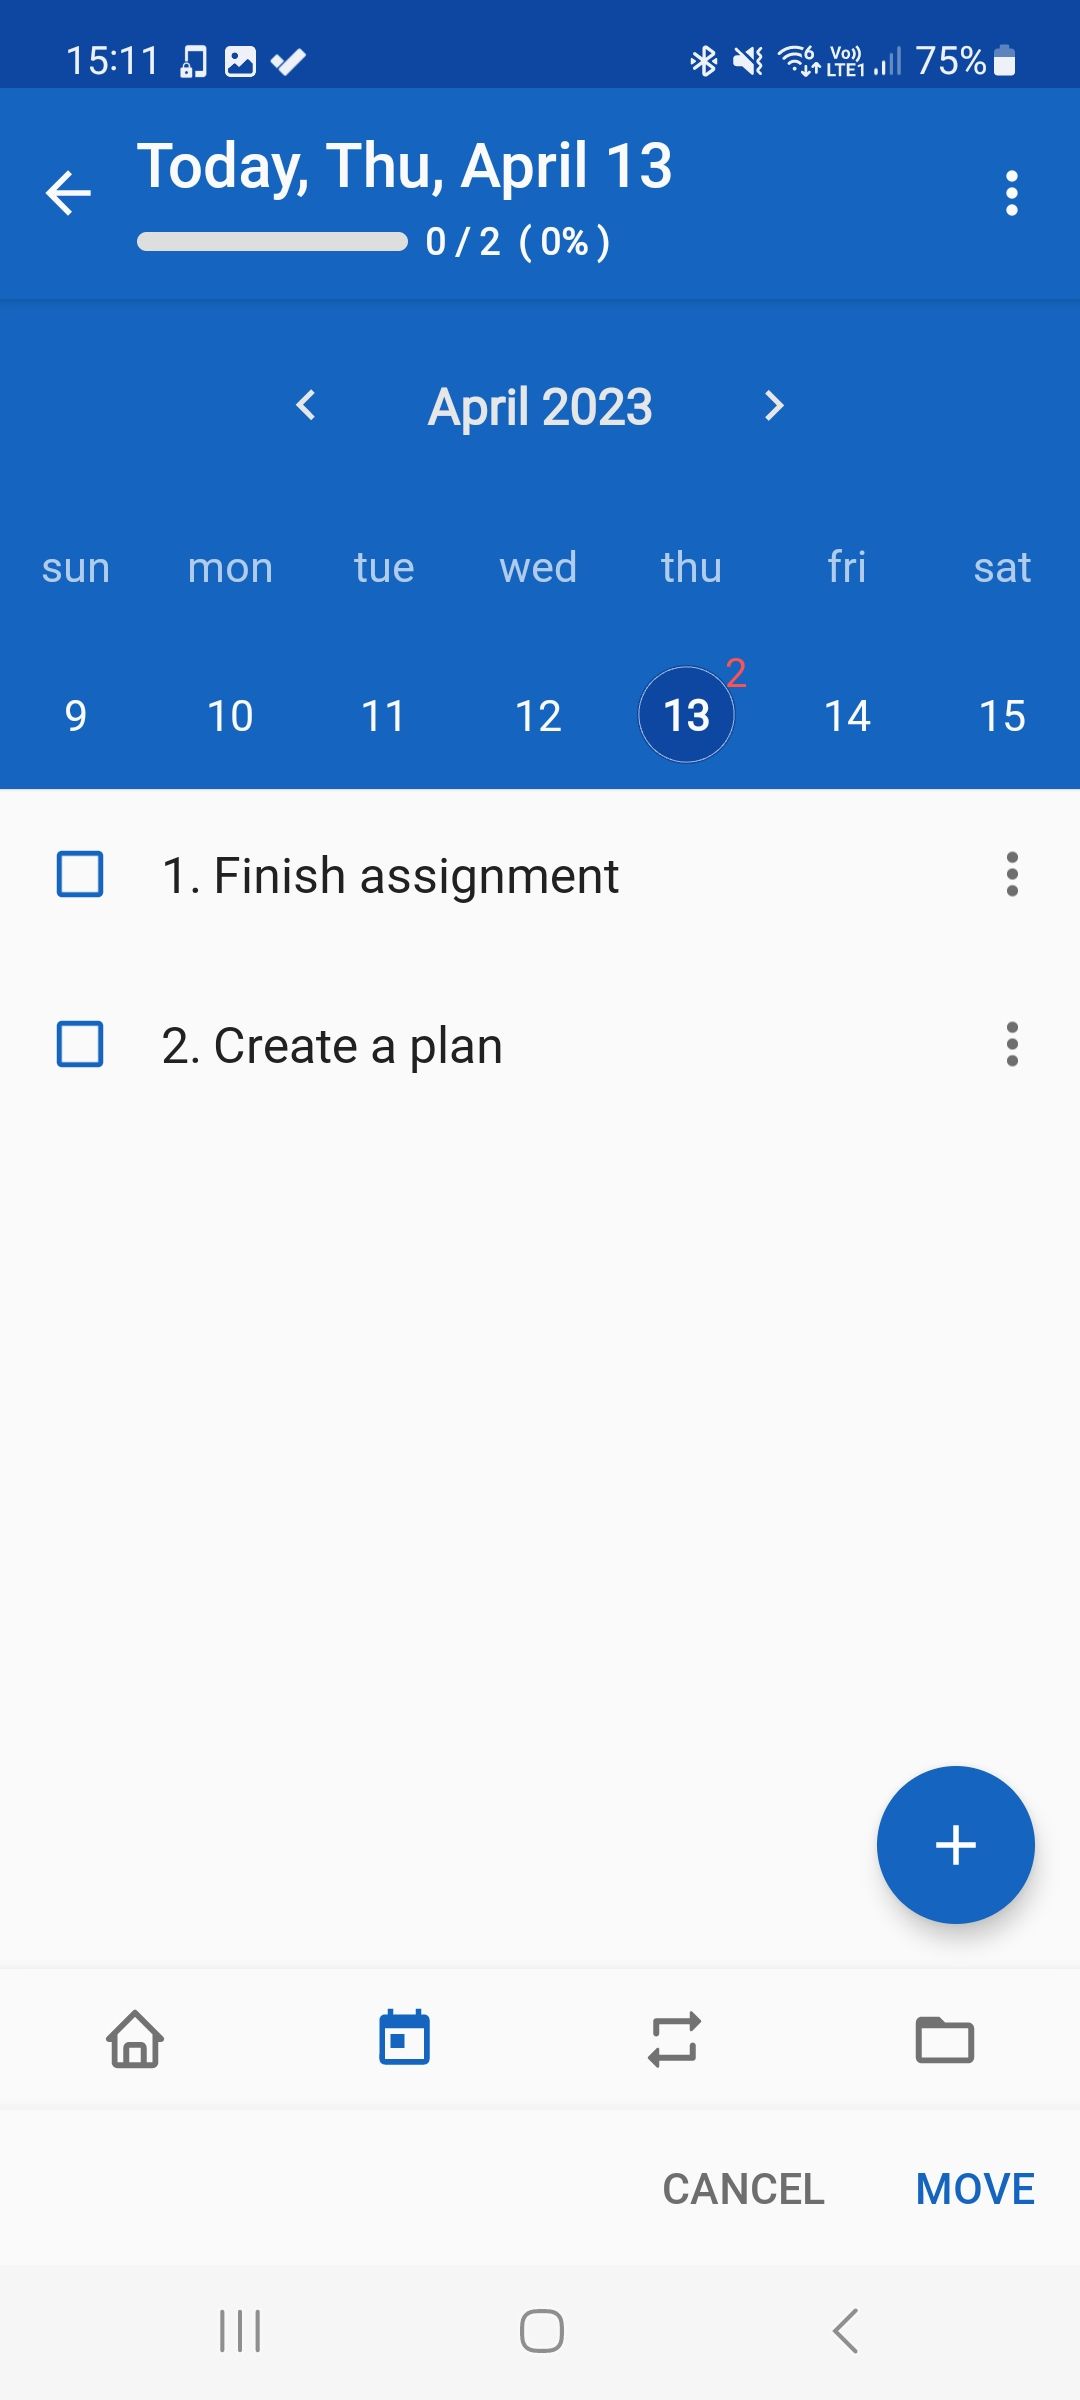 Calendar view in My Daily Planner